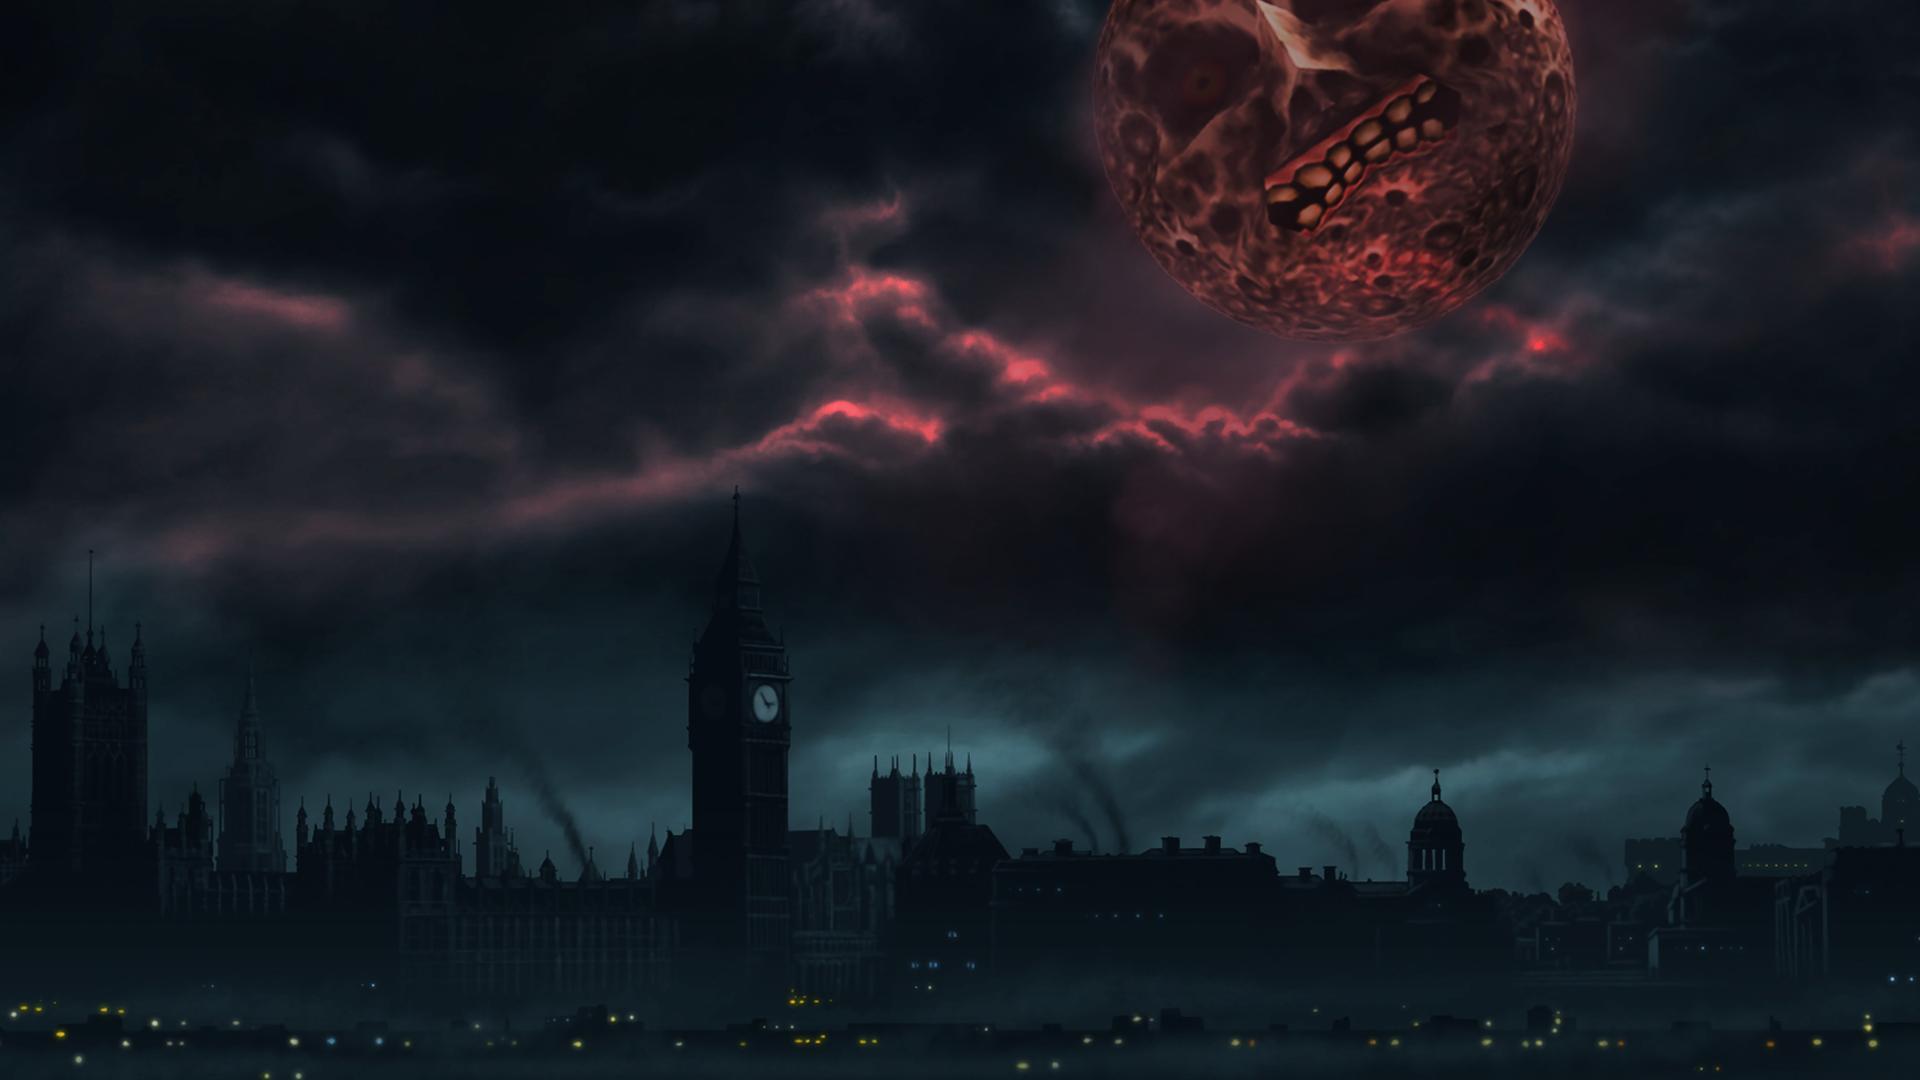 Made a London themed Majora&Mask wallpapers because end of the